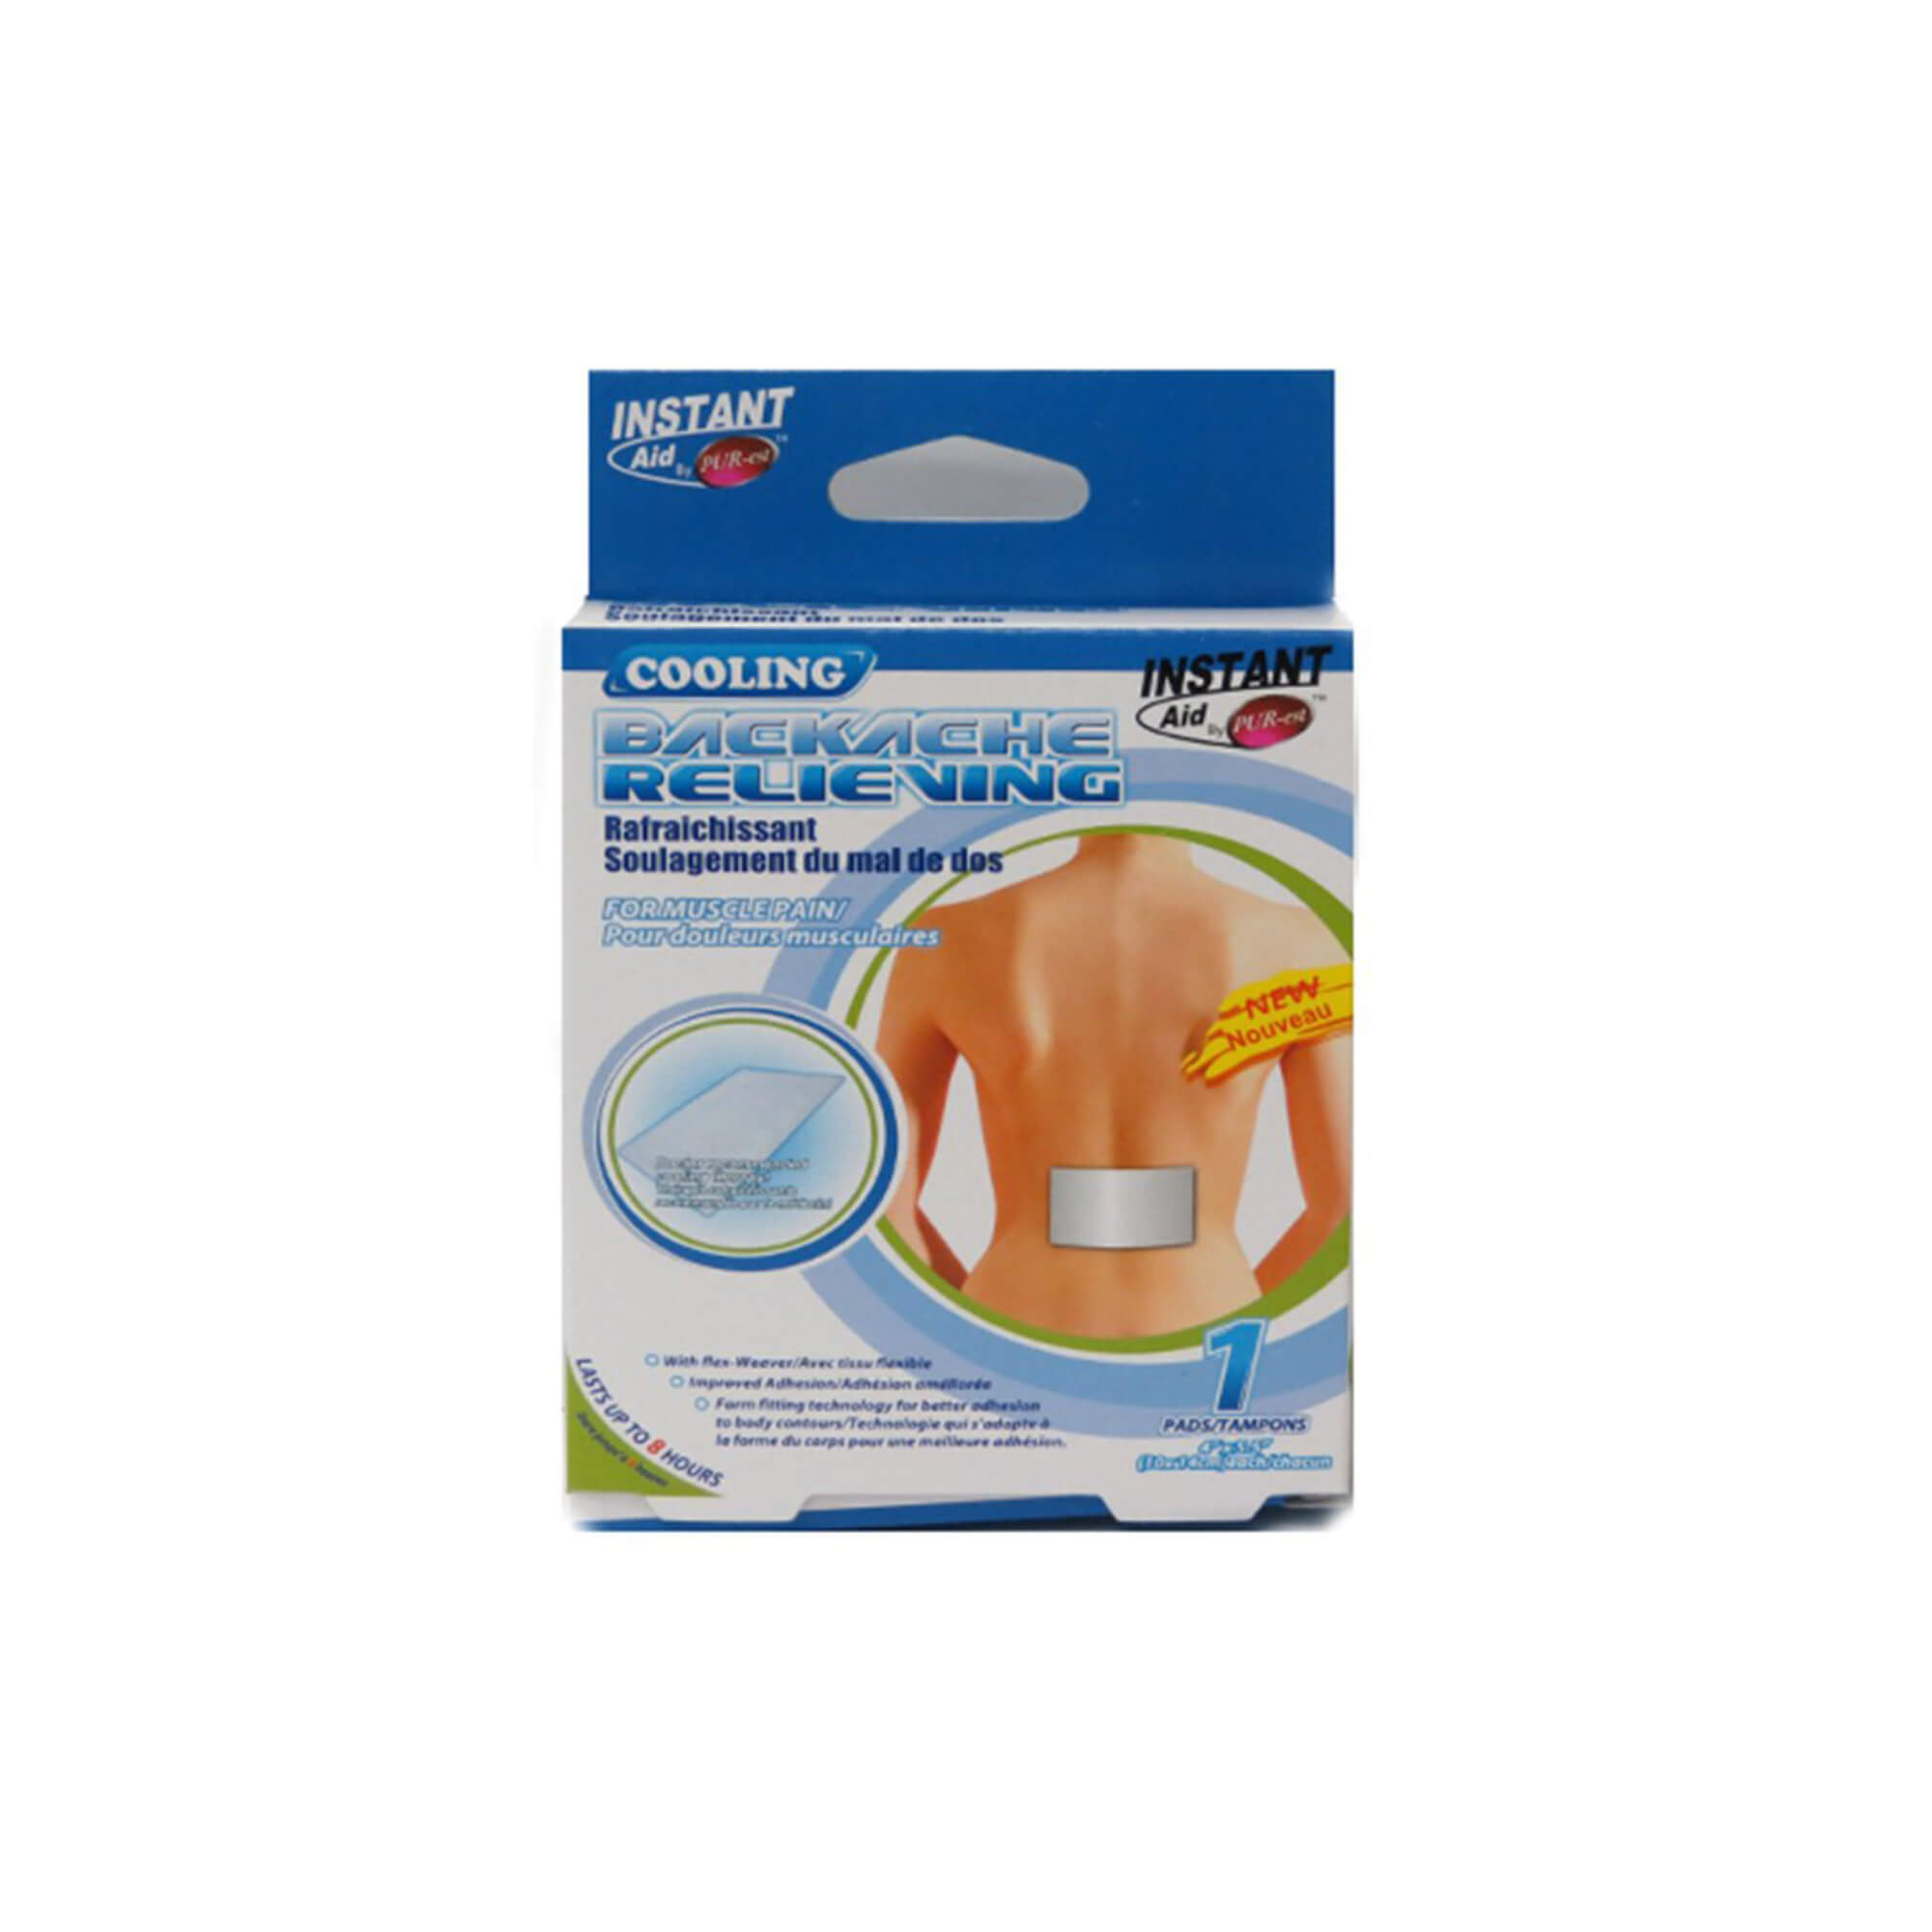 Instant Aid- Cooling Backache Relieving Patch - Pack of 3